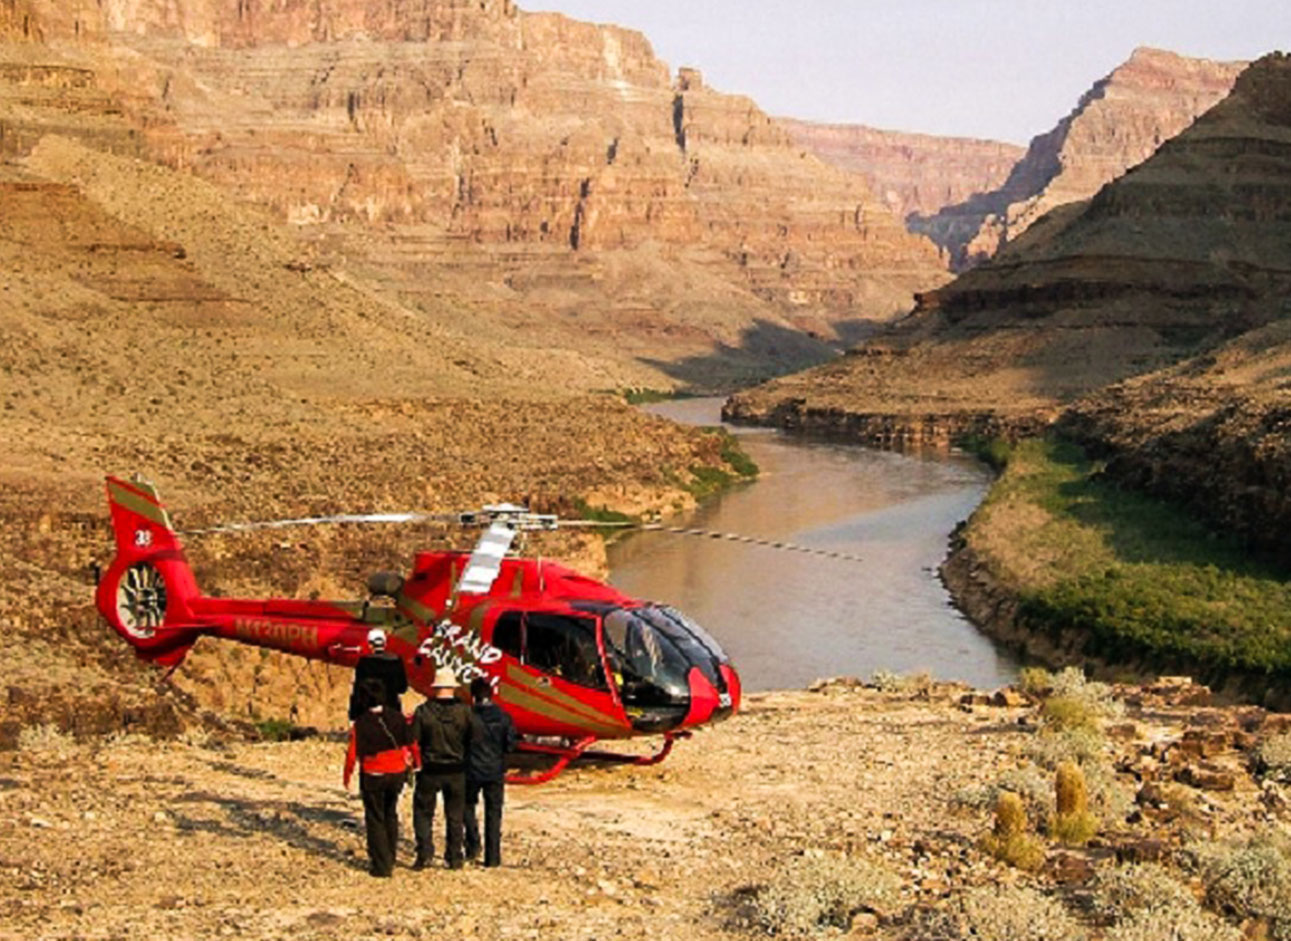 Helicopter Tour - Breathtaking aerial adventures